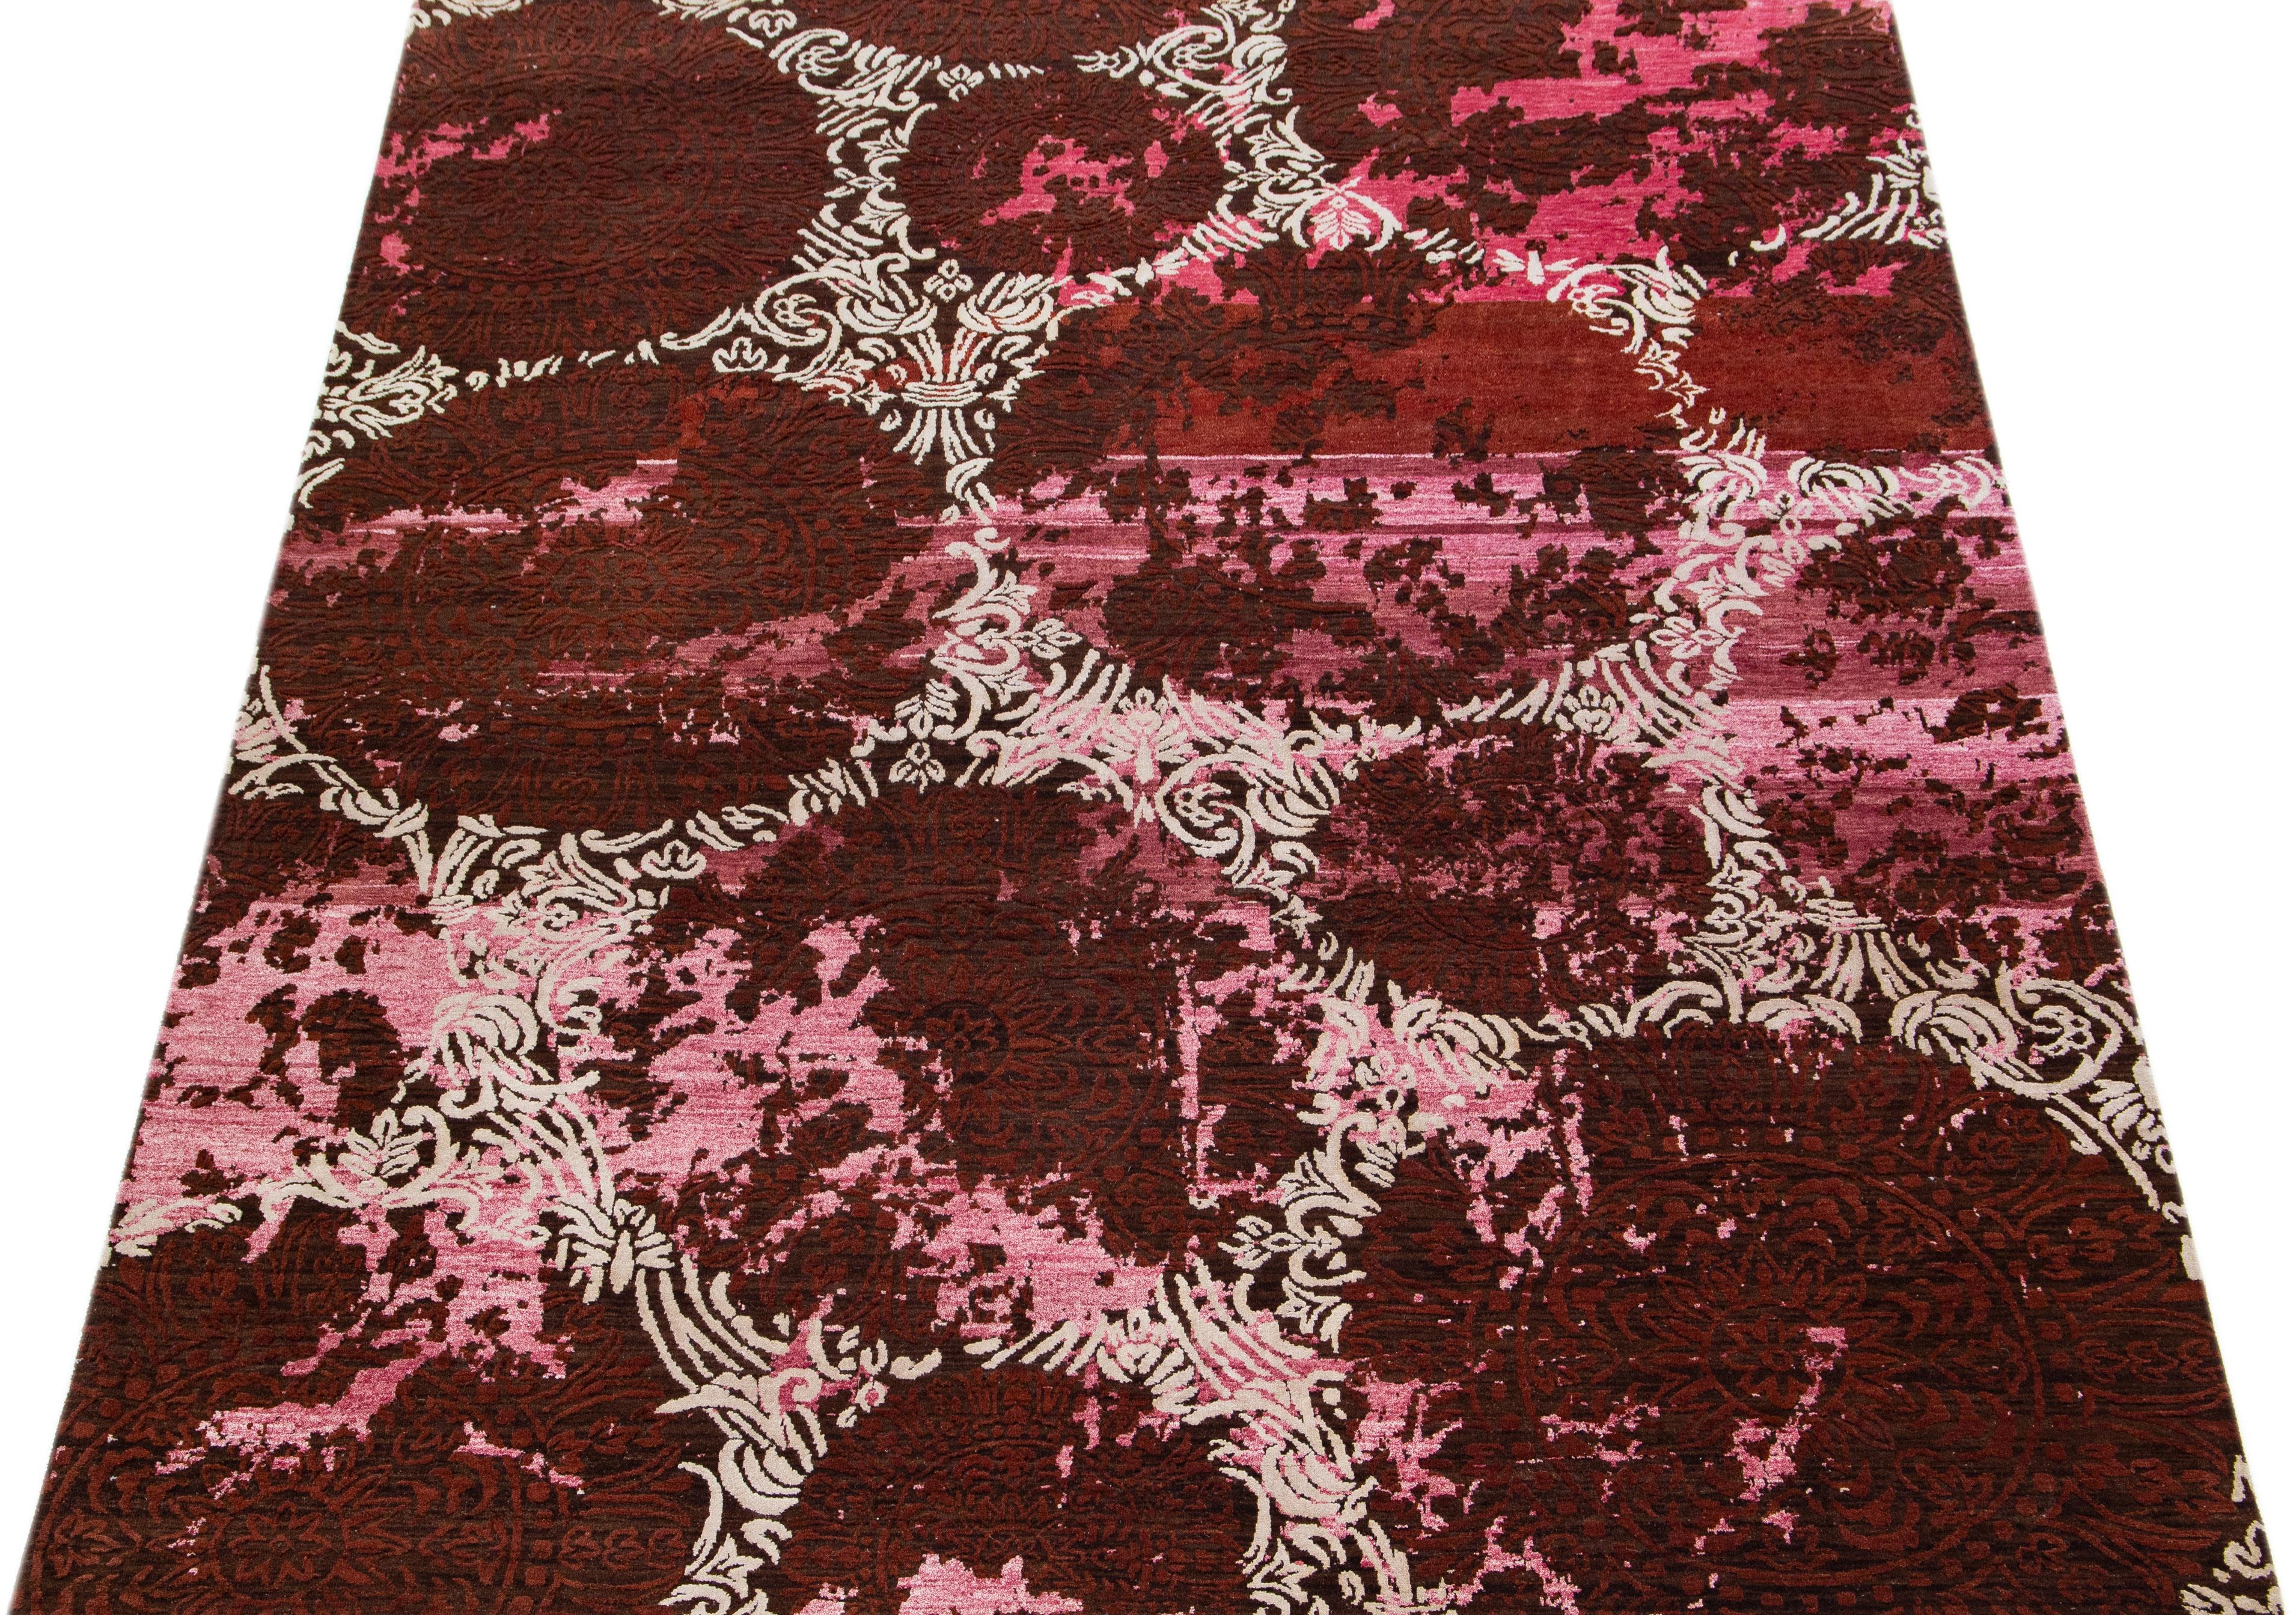 Beautiful modern Tibetan Indian wool & silk rug with the pink field in an abstract patterning ivory and burgundy color. This combination of materials offers strength and durability for everyday use, and its intricate design adds a touch of elegance